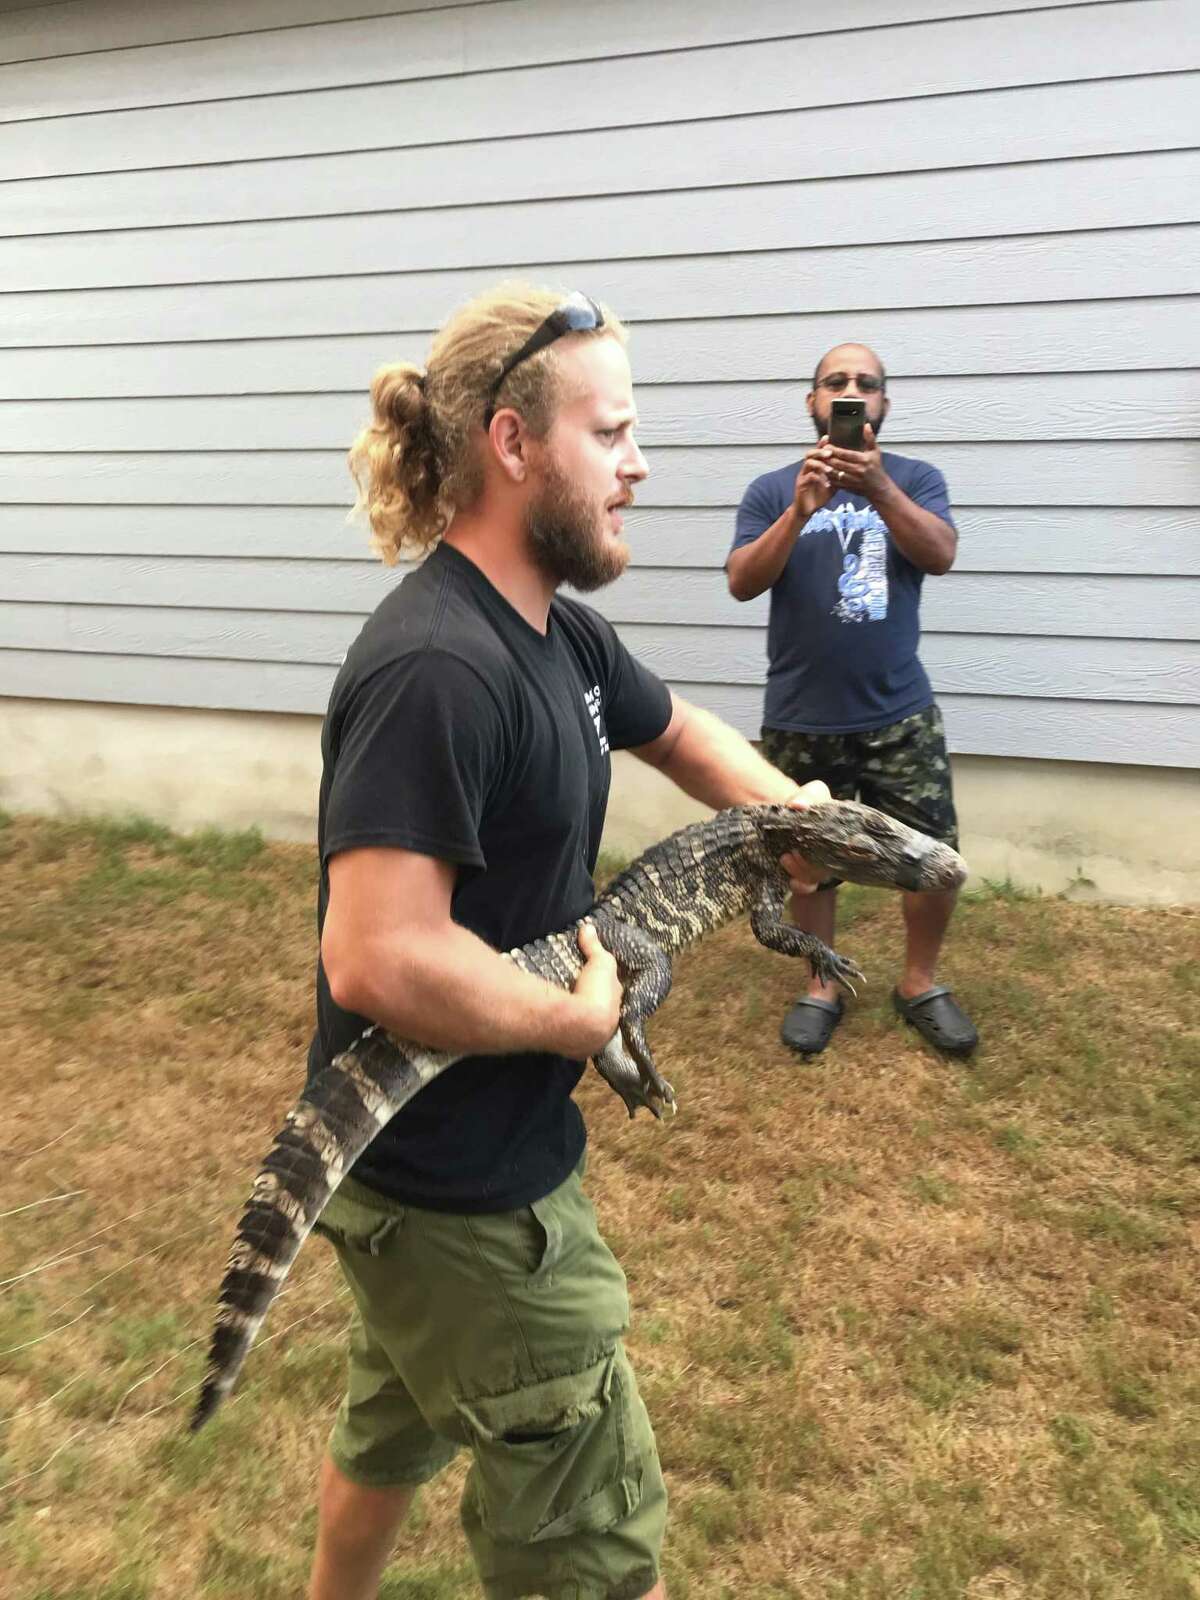 Reptile care specialist Caleb Harris of Animal World and Snake Farm Zoo takes firm hold of an alligator at a home on San Antonio's Southeast Side on Tuesday, Aug. 4, 2020.